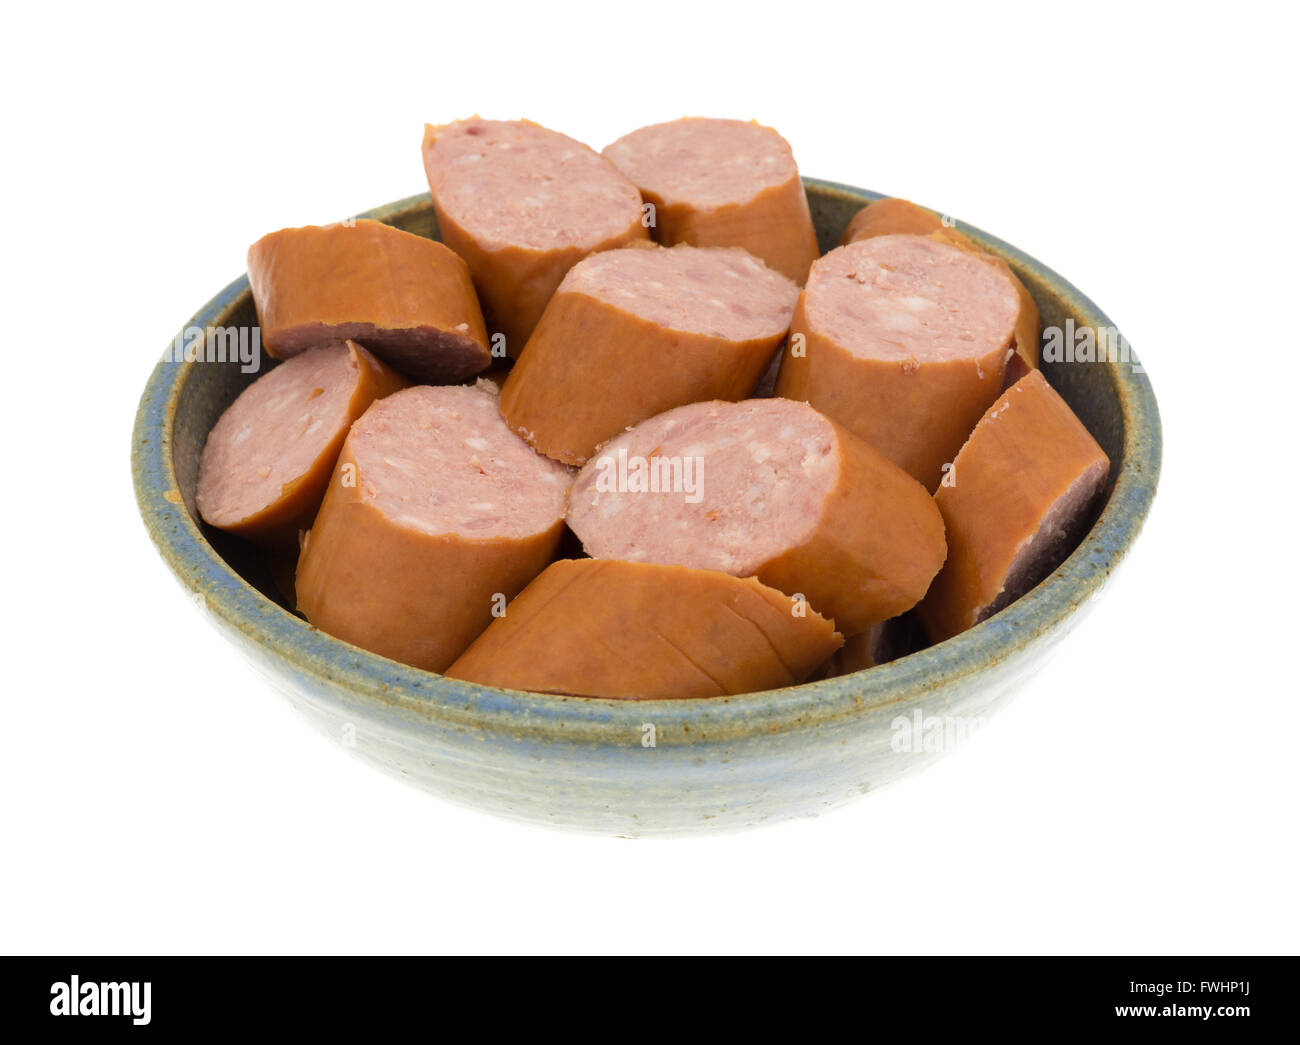 Several slices of reduced calorie kielbasa sausage in an old stoneware bowl isolated on a white background. Stock Photo